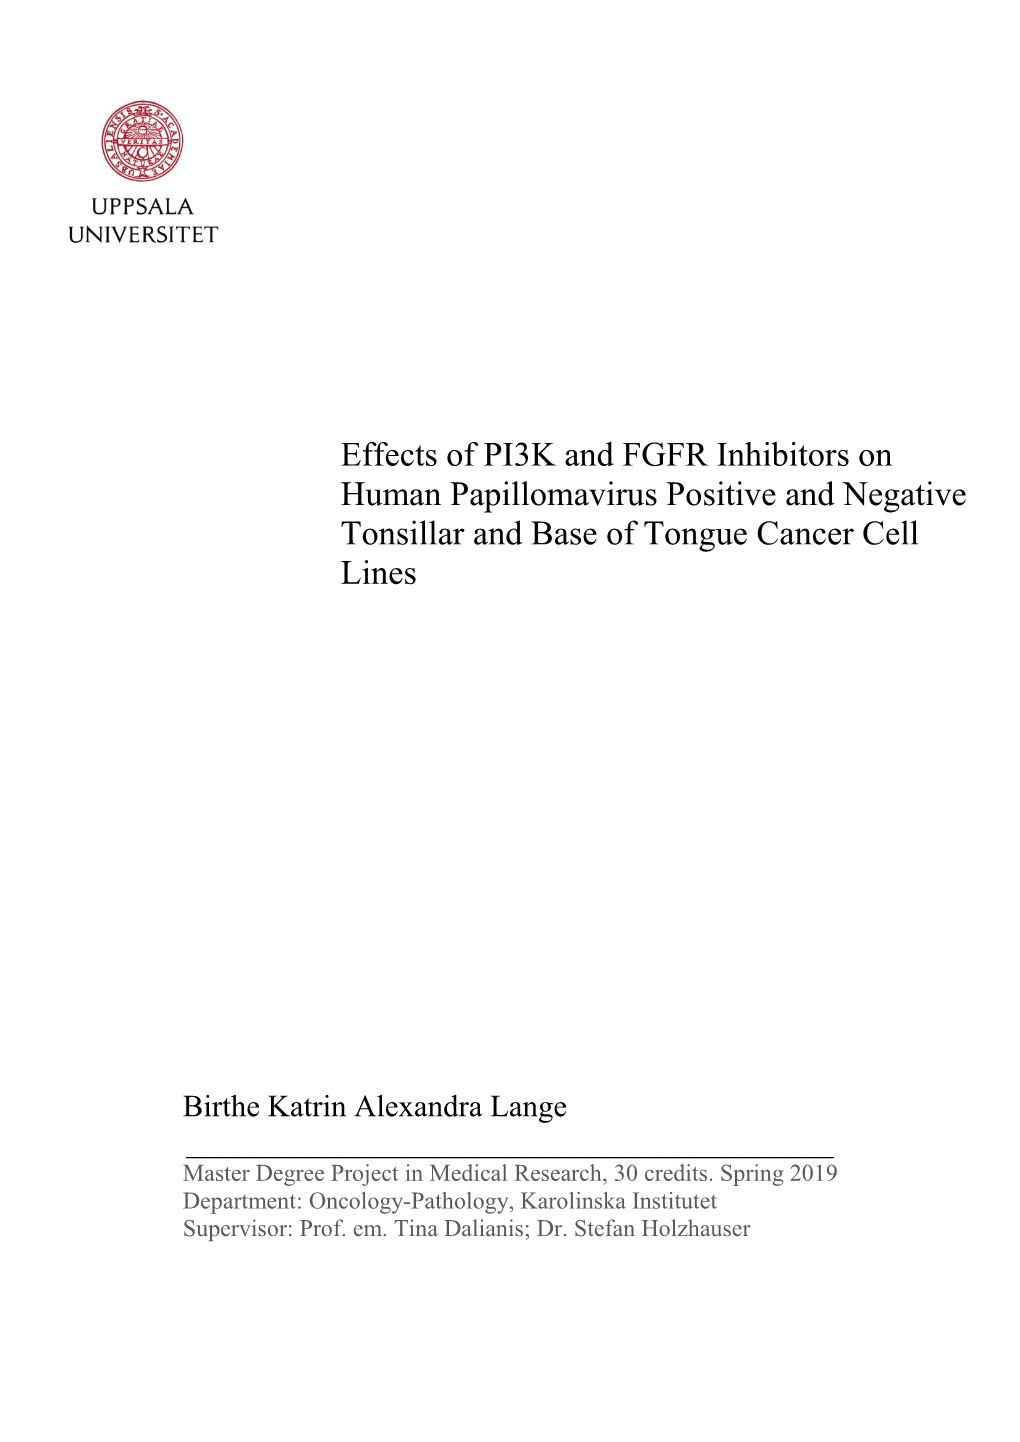 Effects of PI3K and FGFR Inhibitors on Human Papillomavirus Positive and Negative Tonsillar and Base of Tongue Cancer Cell Lines